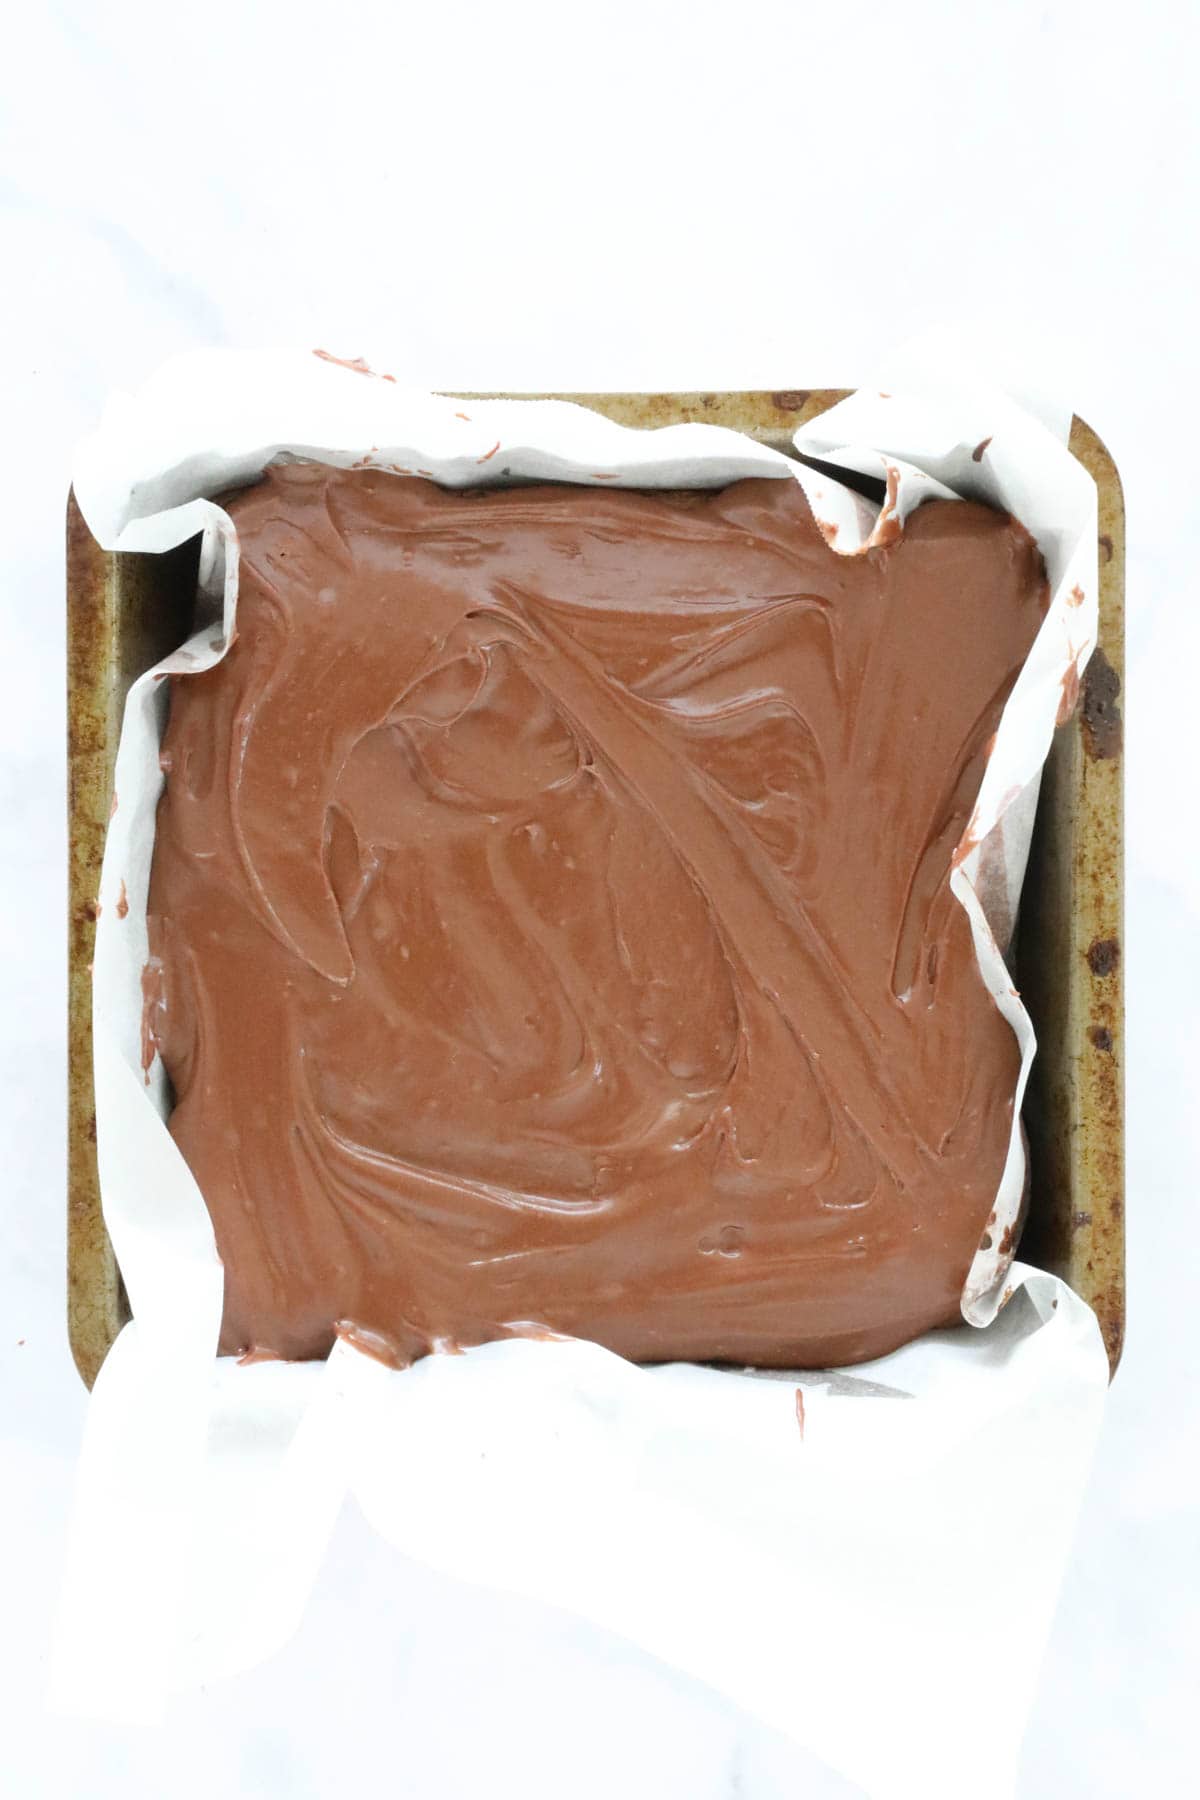 A frosted brownie in a tin.